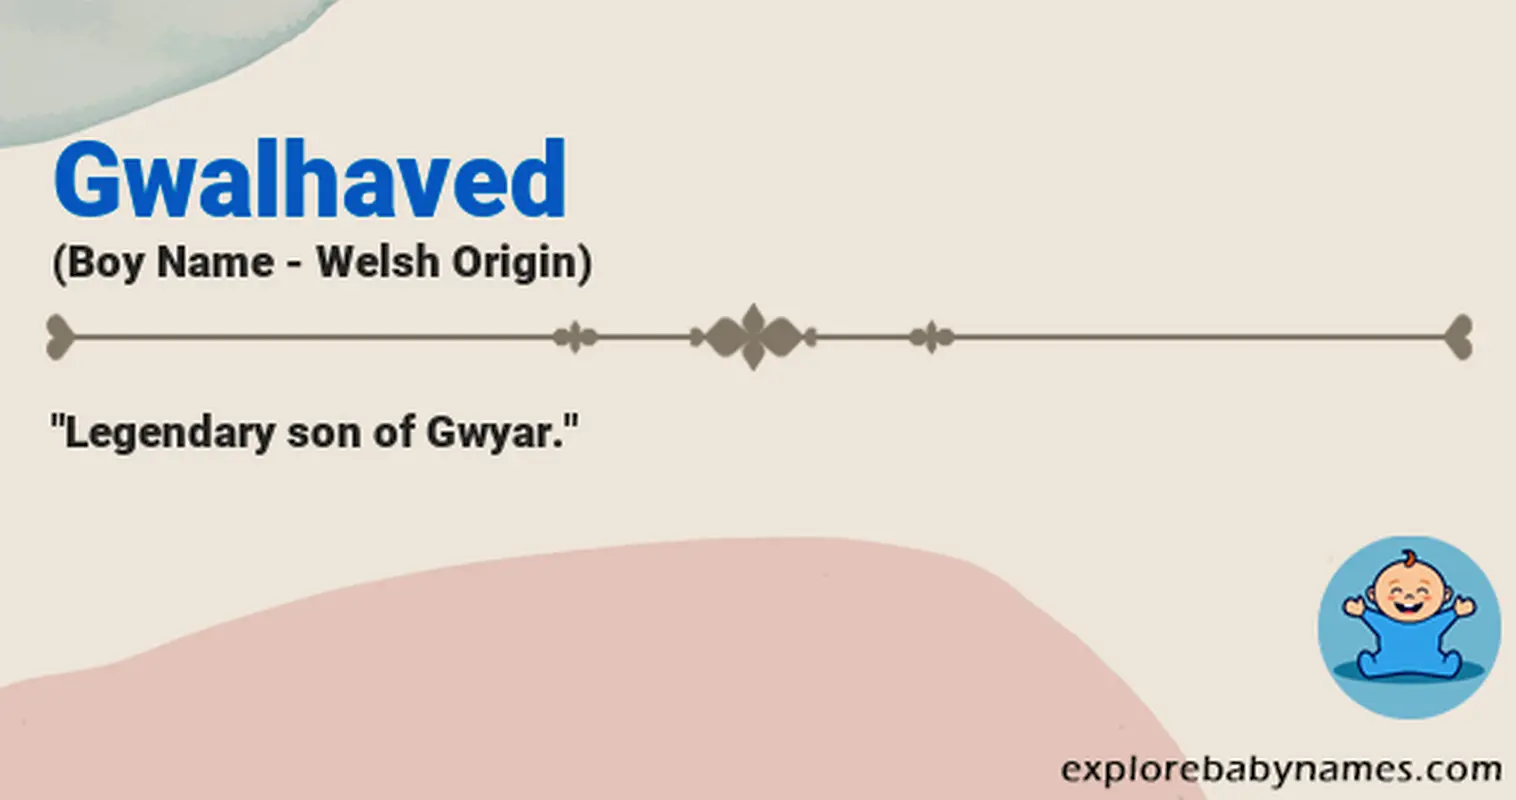 Meaning of Gwalhaved